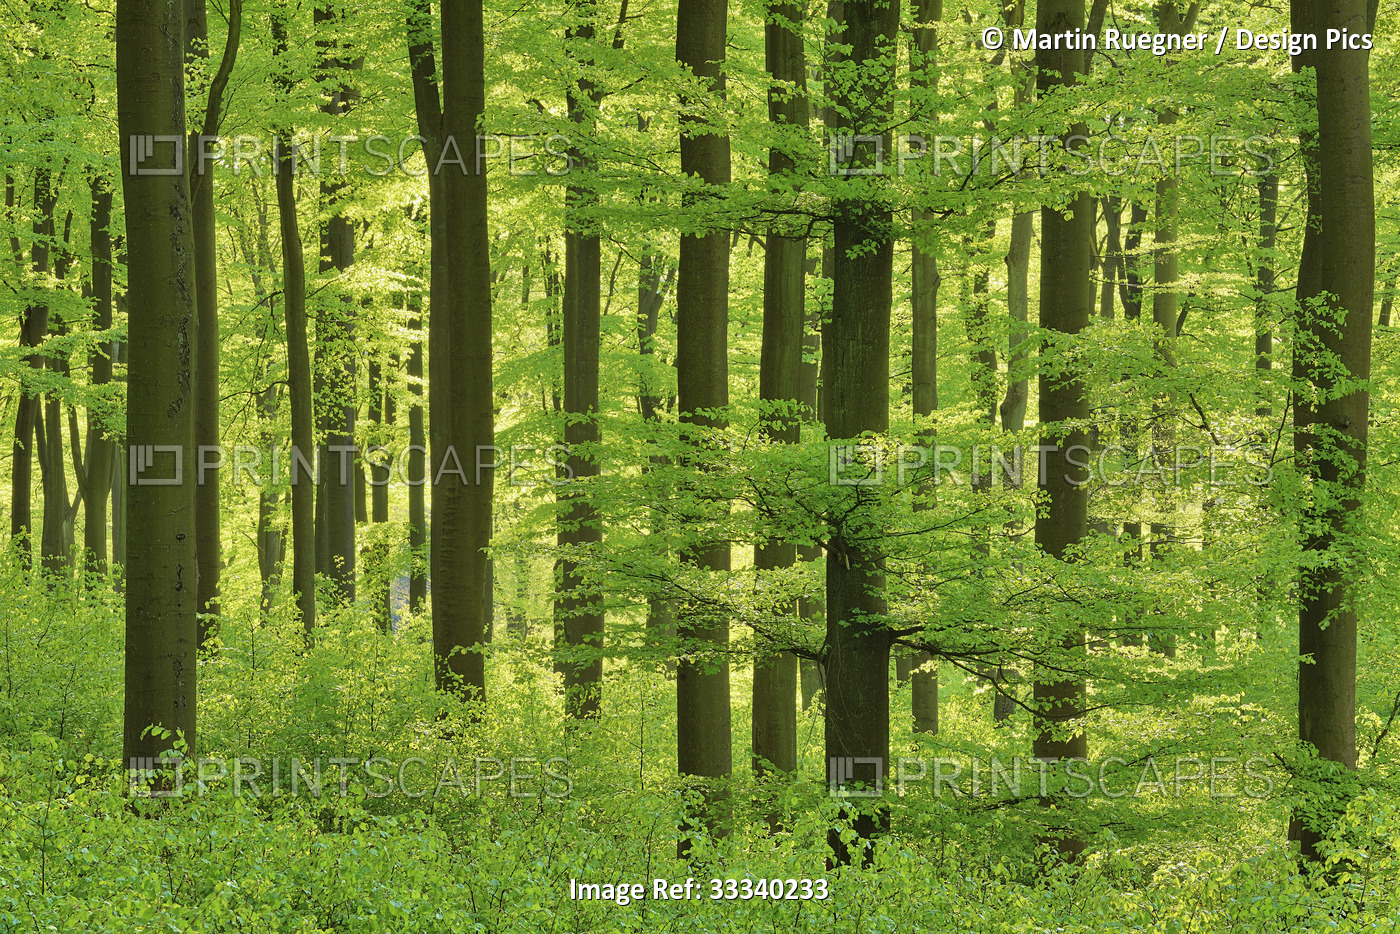 Bright green foliage in a forest; Rhineland-Palatinate, Germany